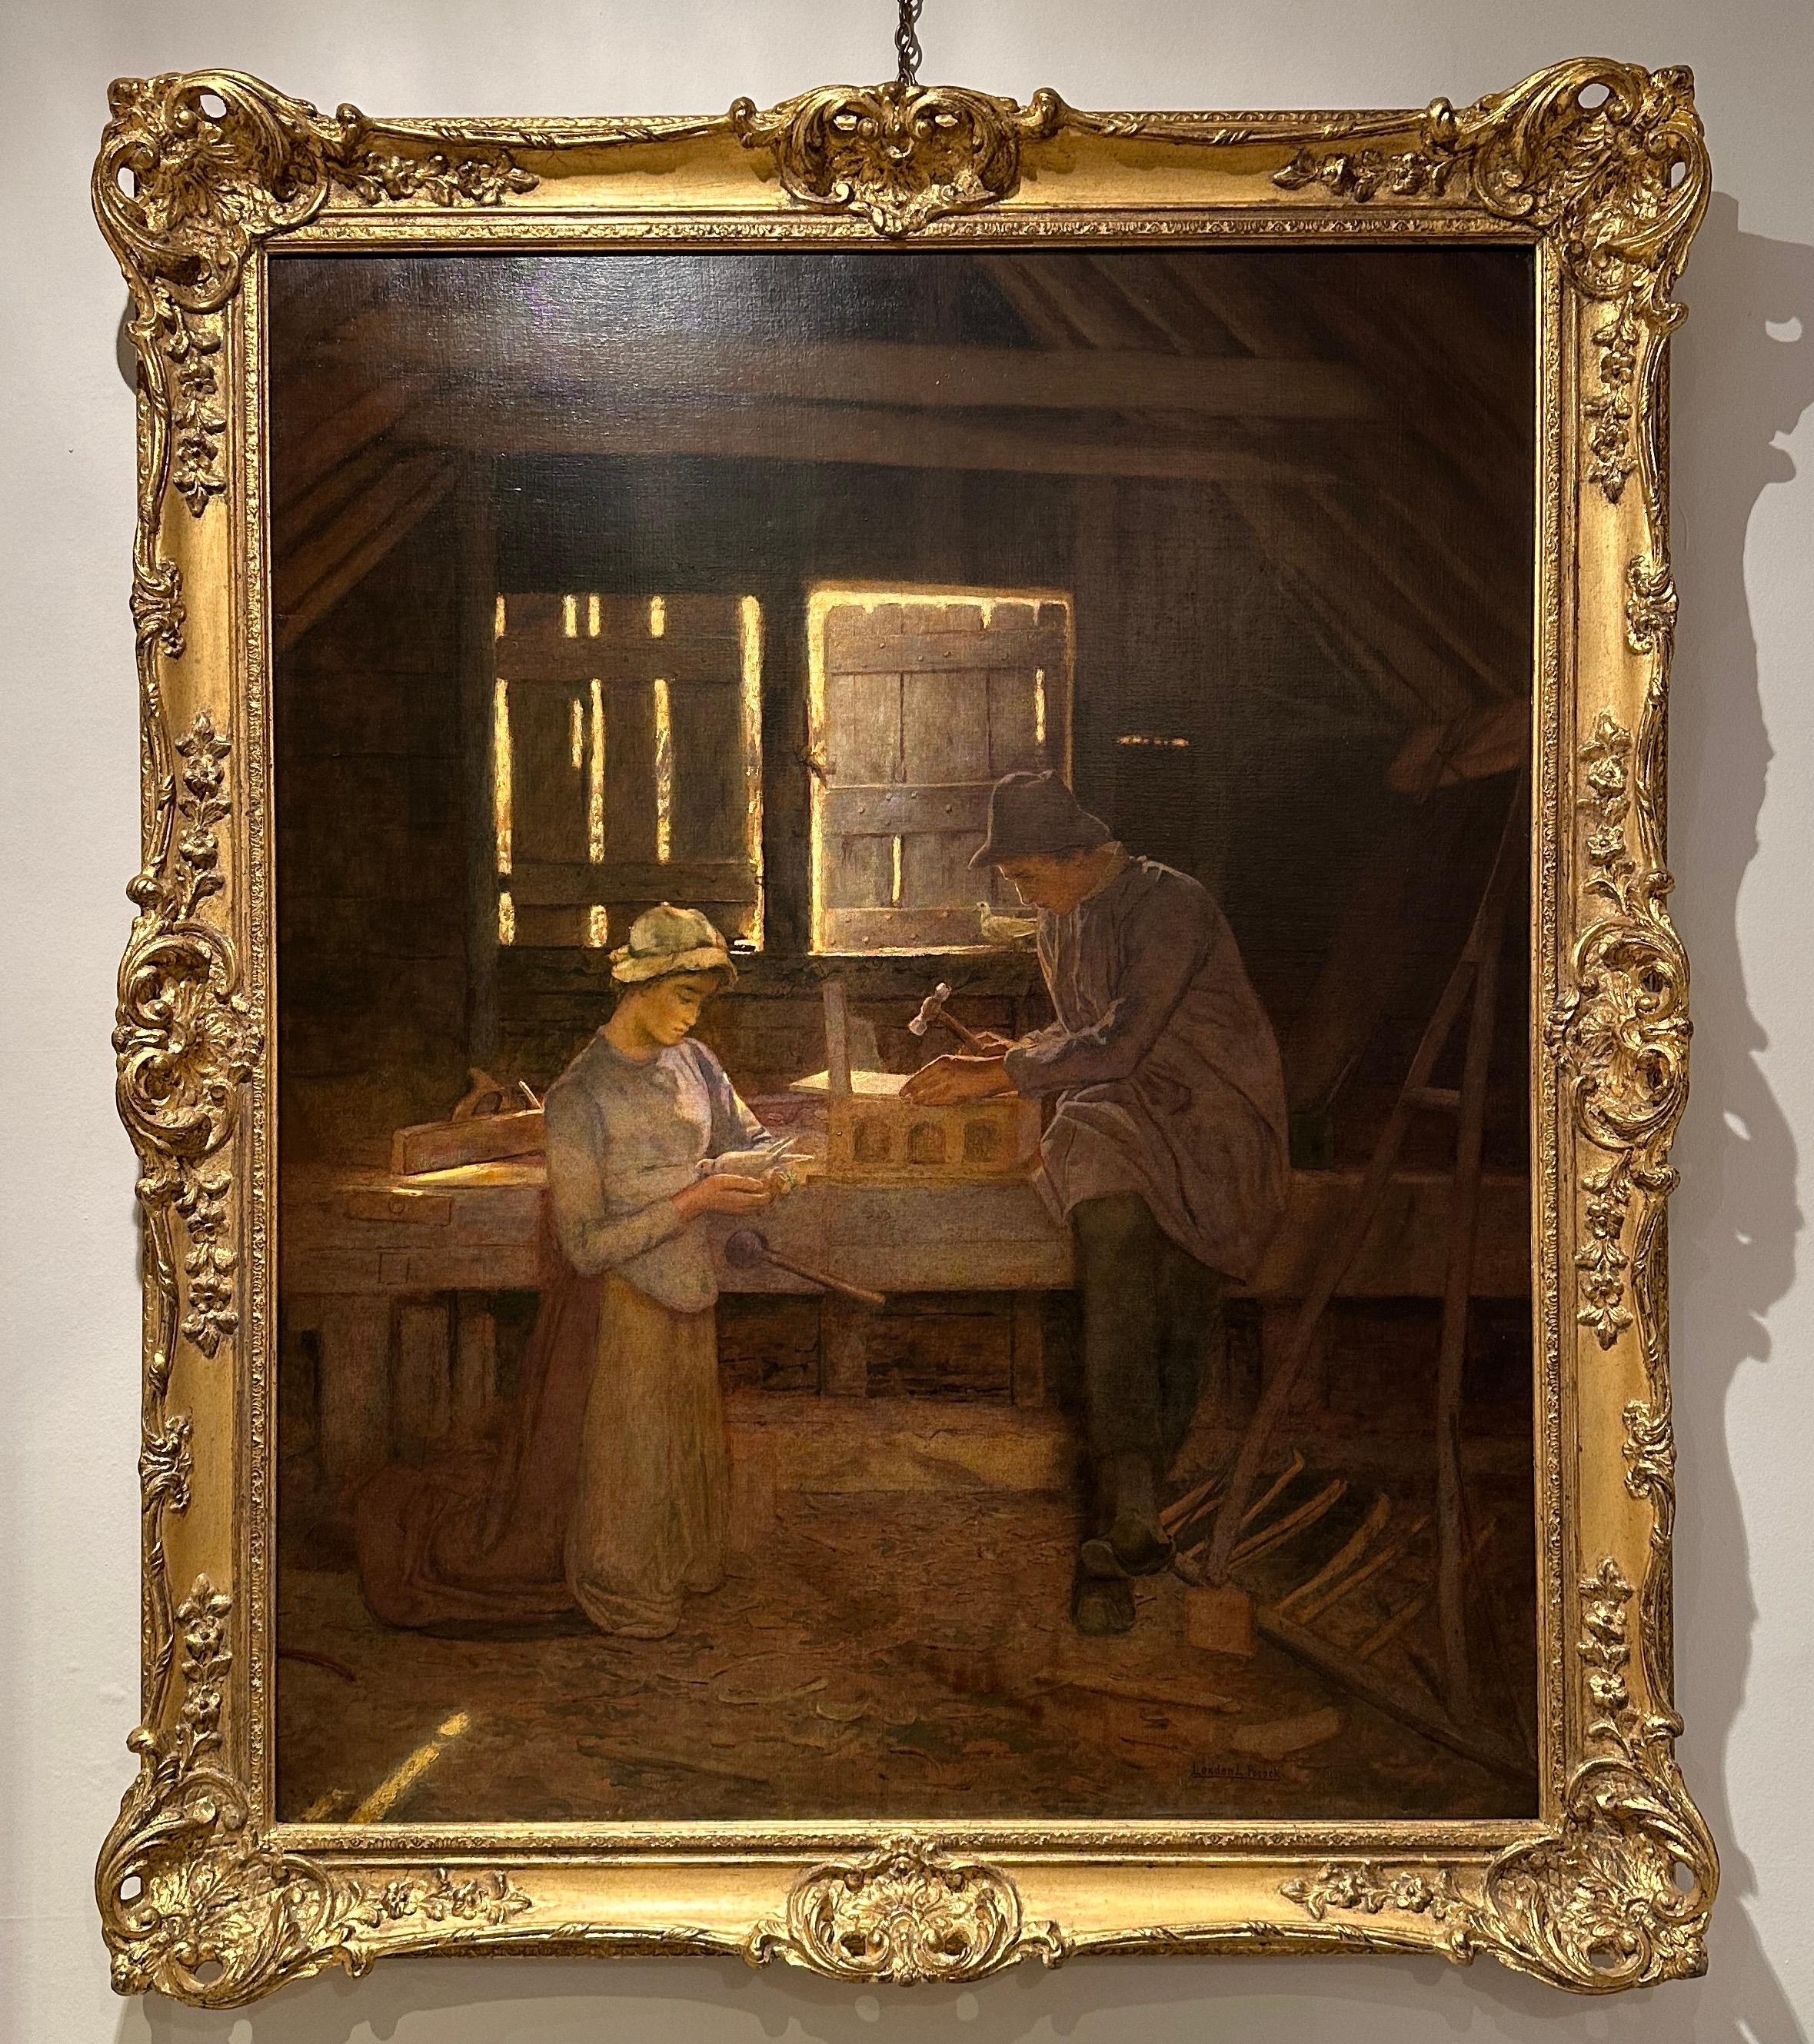 Bucolic Joinings’ by Lexden Lewis Pocock. 

Oil on canvas, depicting a kneeling maid and her swain in the carpenter’s shop, she tending a turtle dove, while it’s mate waits on the windows edge; the man at patient toil.

Lexden Lewis Pocock